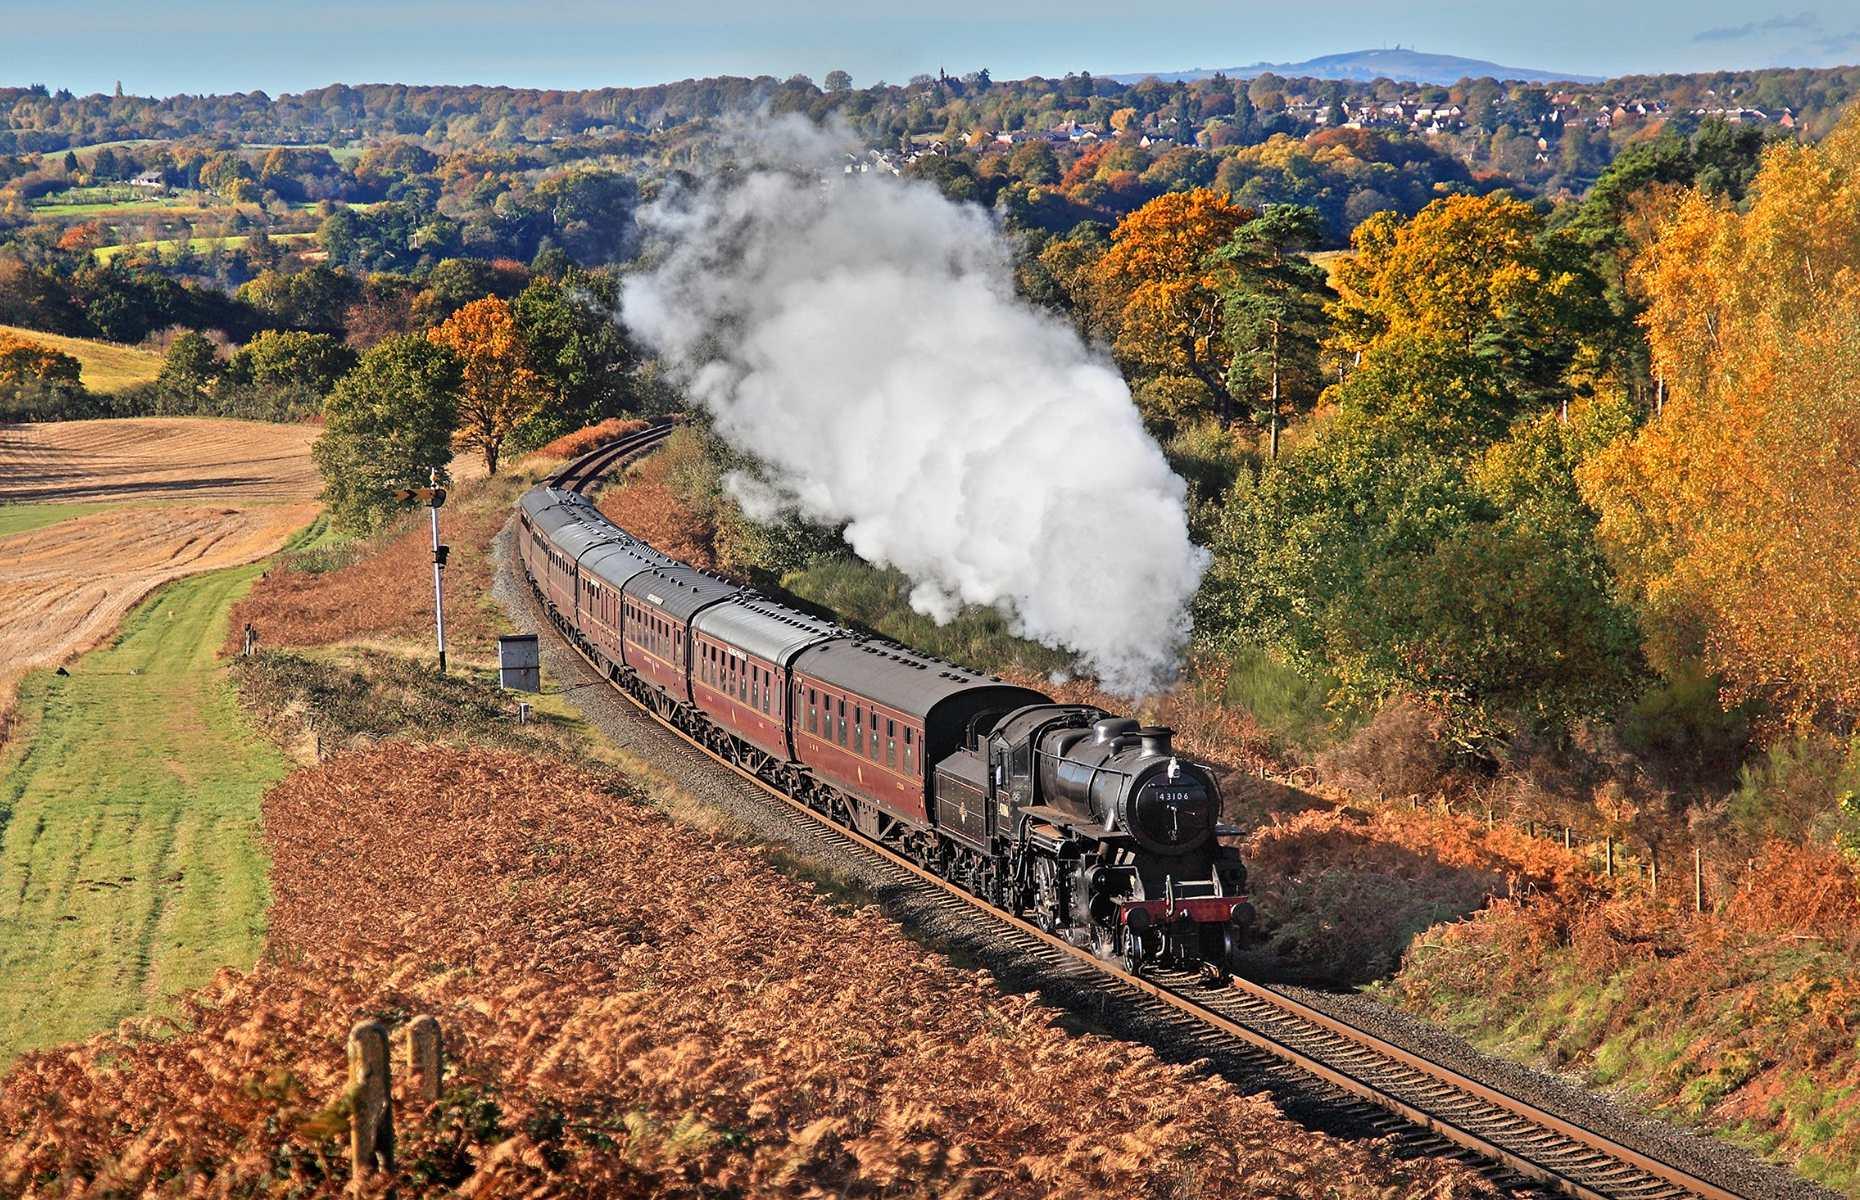 <p>The <a href="https://www.svr.co.uk/">Severn Valley Railway</a> is a charming steam train railroad that runs along the Severn Valley in the West Midlands. The 16-mile (26km) route between Kidderminster, Bewdley and Bridgnorth takes in picture-perfect countryside views as it trails through charming towns and villages. The journey mostly follows the River Severn as it zigzags through the landscape and takes around 70 minutes each way.</p>  <p><a href="https://www.loveexploring.com/gallerylist/69165/the-uks-prettiest-small-towns-and-villages-2021"><strong>These are the UK's prettiest small towns and villages</strong></a></p>